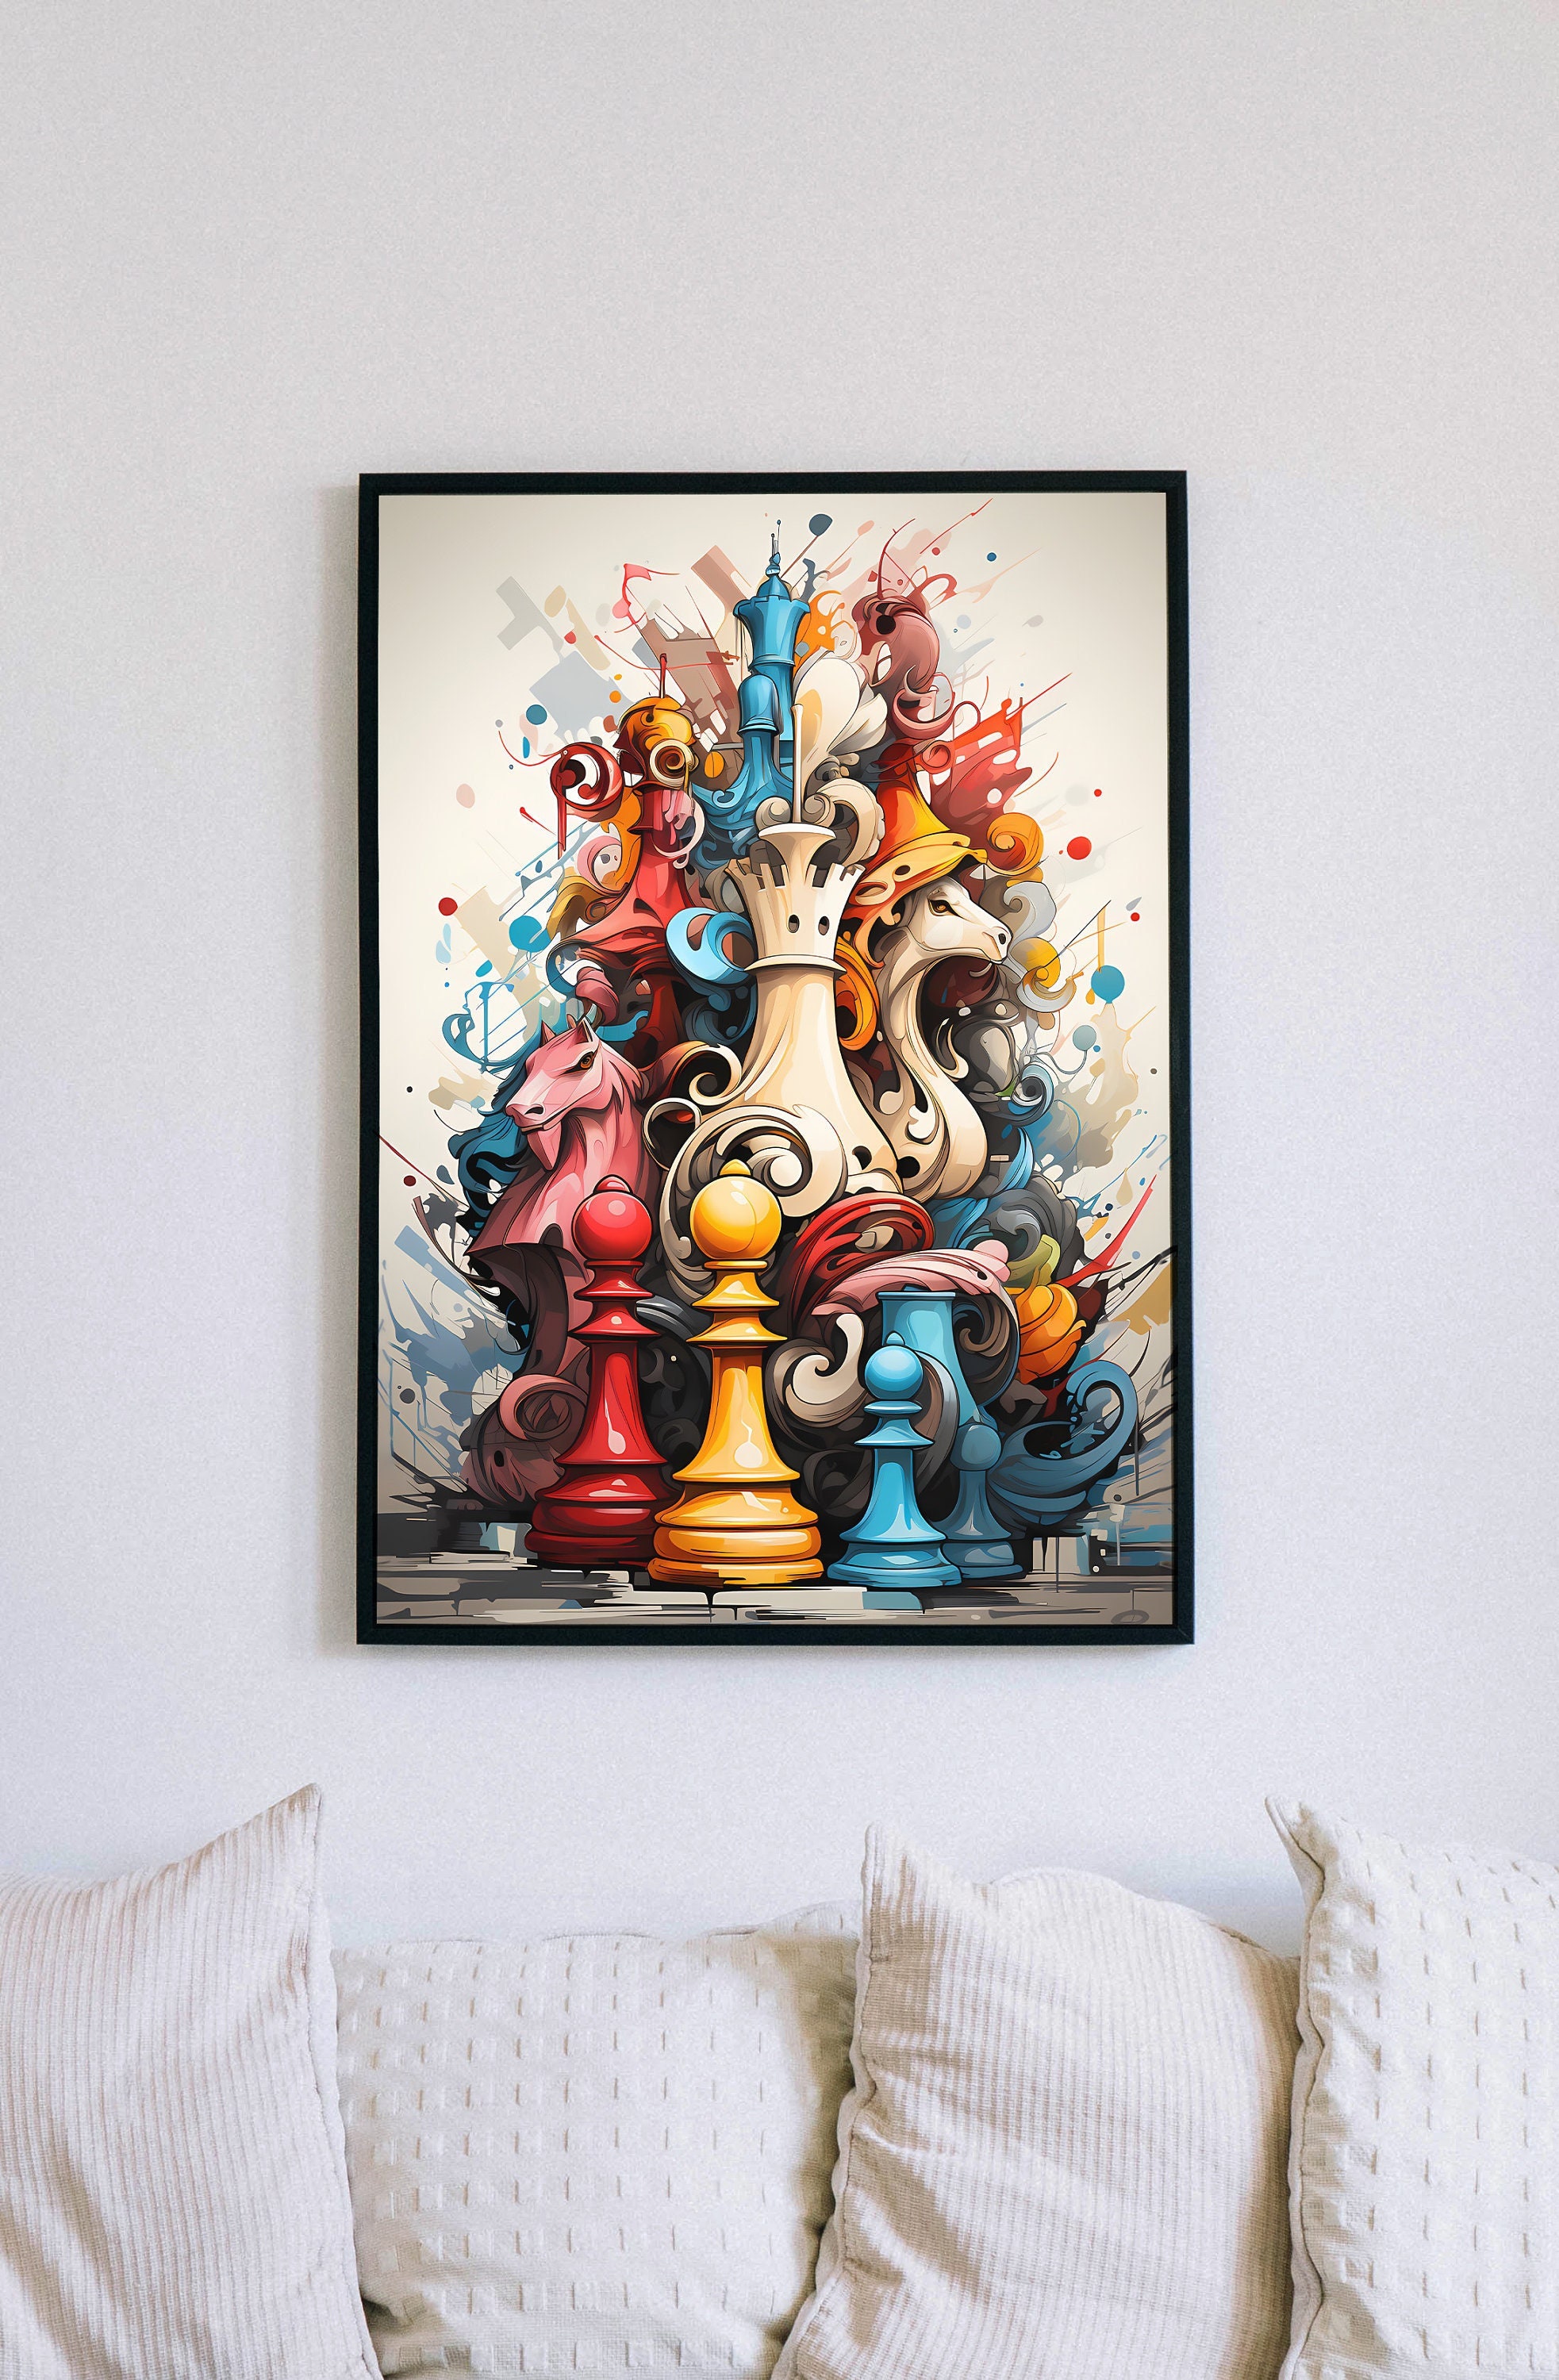  reoqeosy Graffiti Banksy Chess Decor Wall Art Chess Game Room  Wall Art International Chess Pictures Canvas Painting Pop Art Framed  Artwork for Game Room Living Room Bedroom 12''x16'', Pinkche1: Paintings